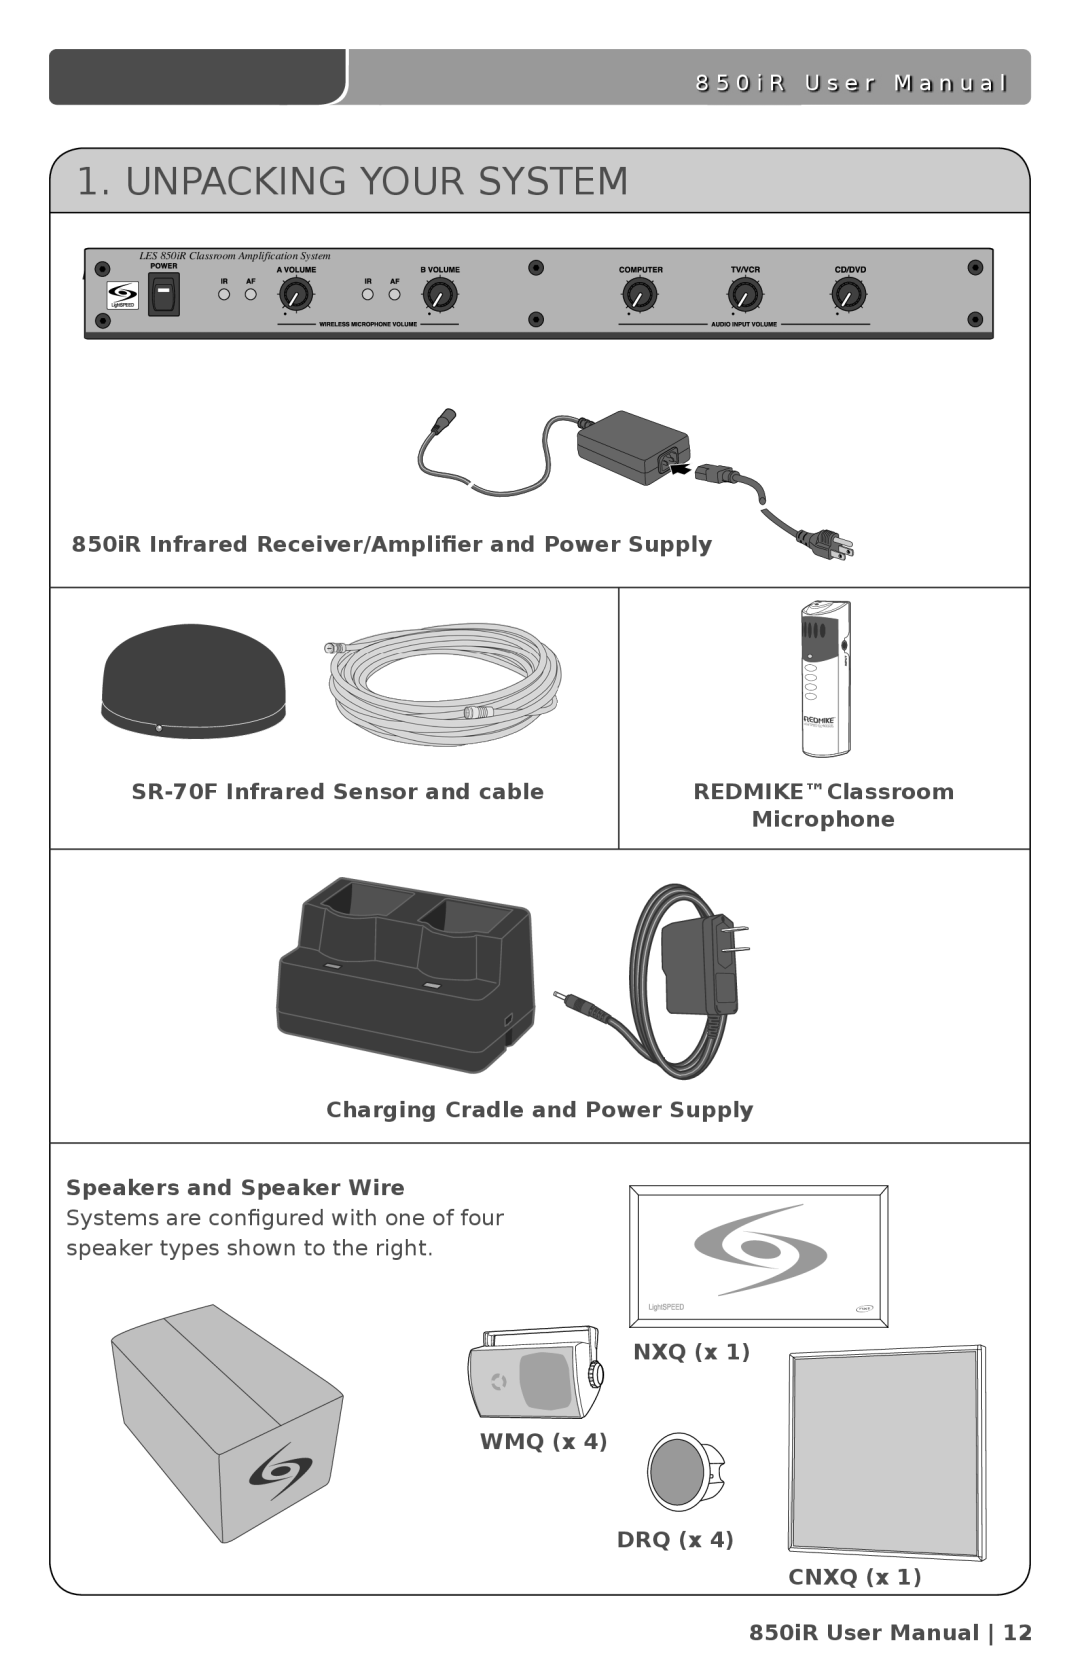 LightSpeed Technologies 850iR Unpacking Your System, 8 5 0 i R U s e r M a n u a l, speaker types shown to the right 